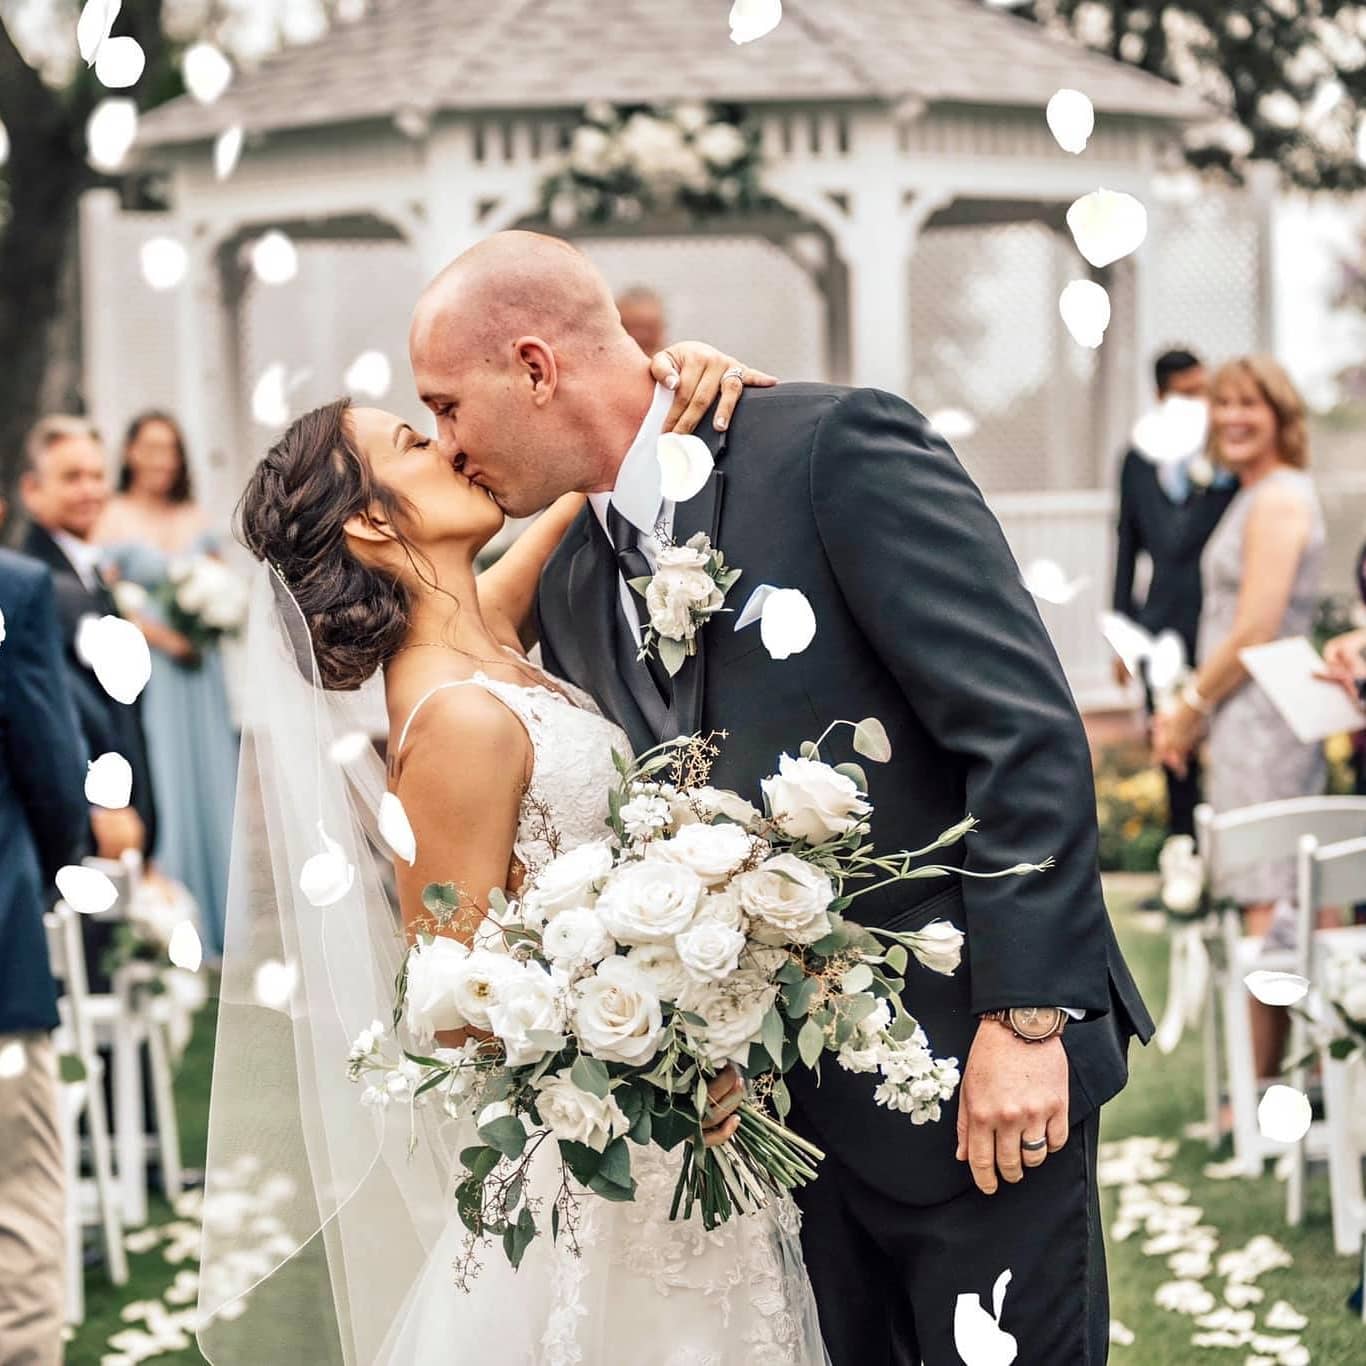 bride and groom kissing at gazebo during outdoor wedding ceremony